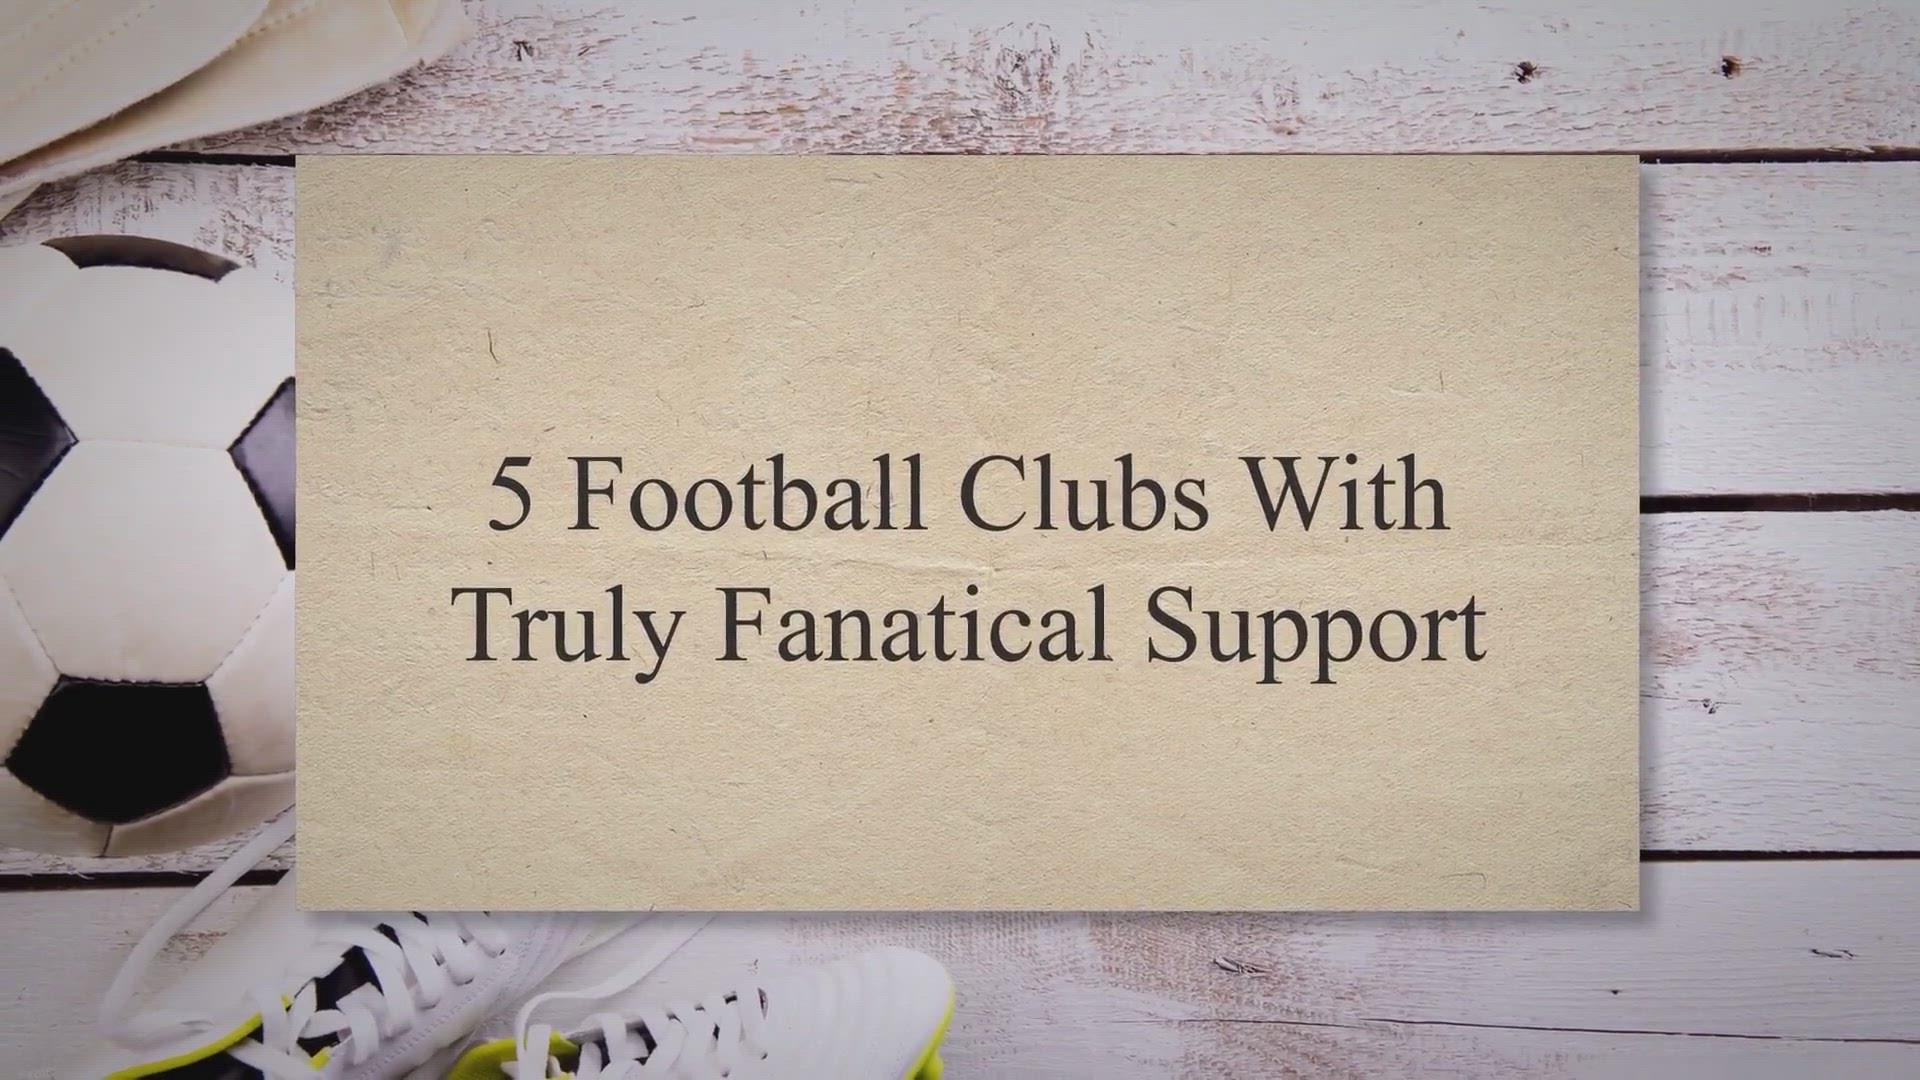 'Video thumbnail for 5 Football Clubs With Truly Fanatical Support'